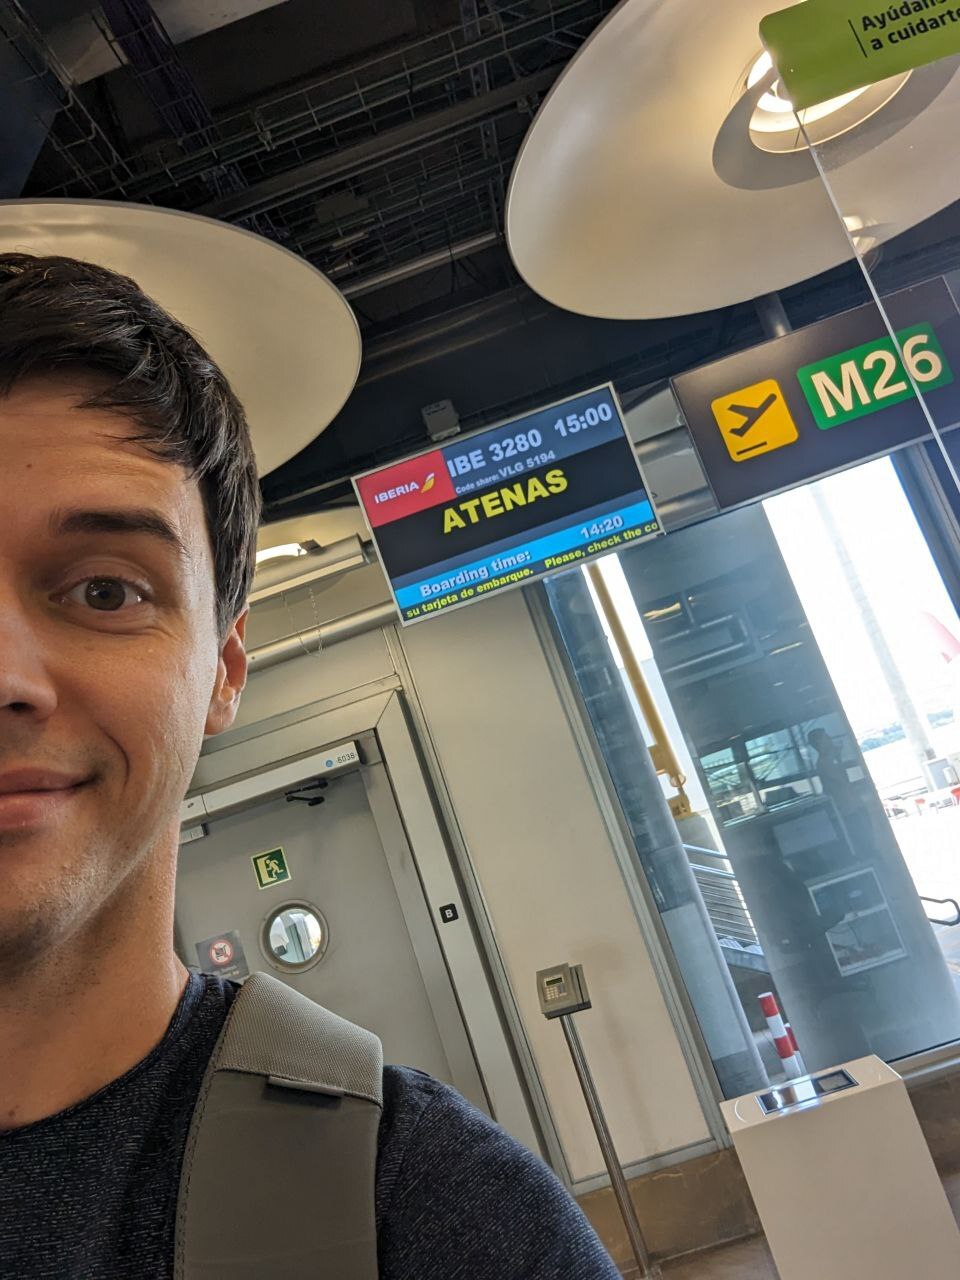 XWP Director of Frontend Engineering Mike Crantea at the boarding gate for Athens